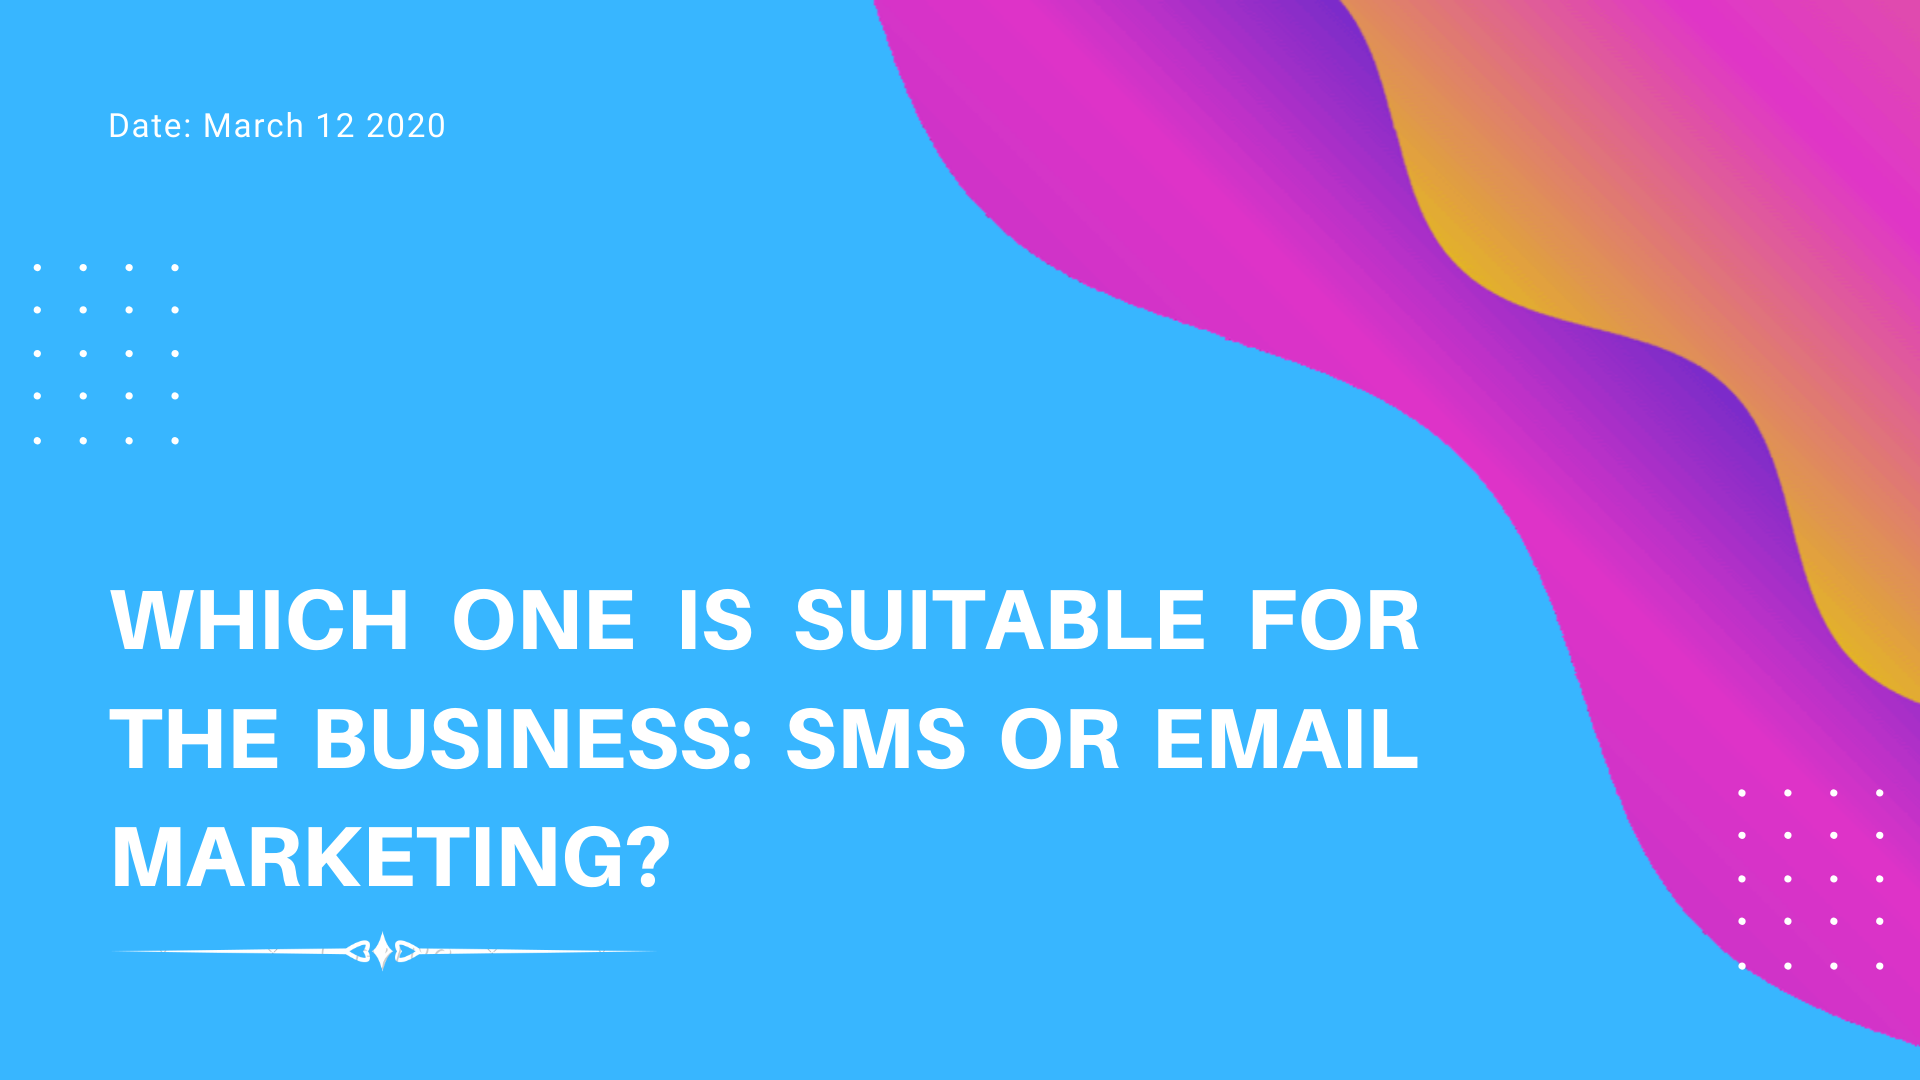 Which one is suitable for the business-SMS or email marketing